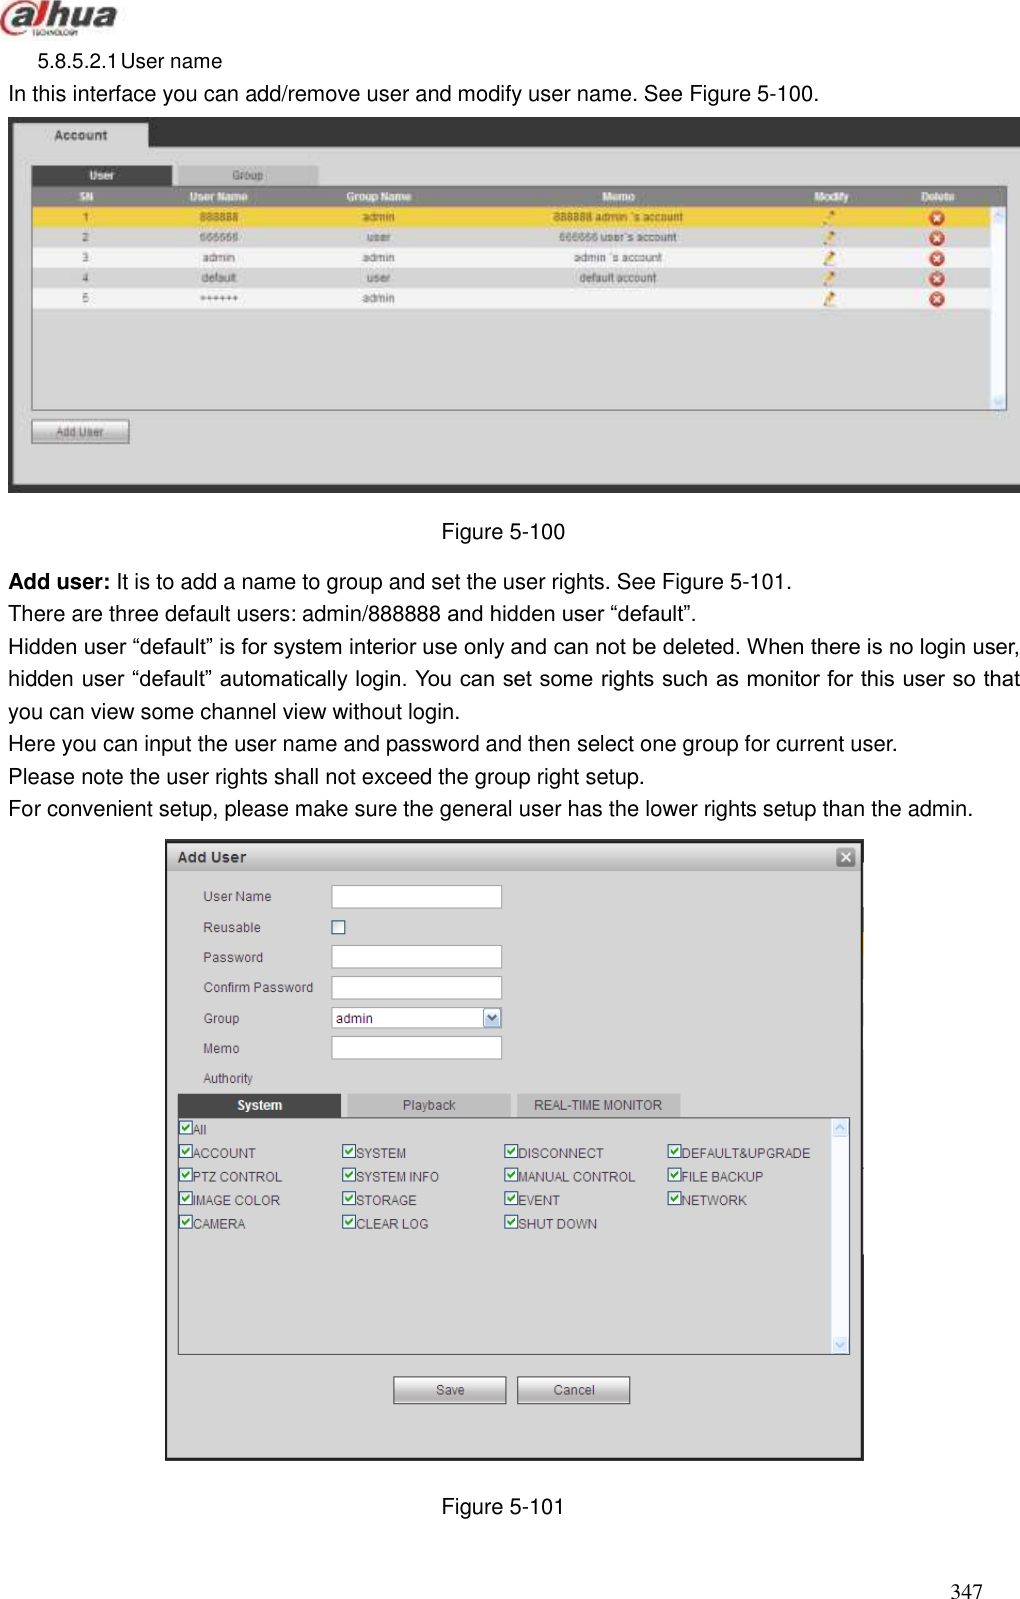  347  5.8.5.2.1 User name   In this interface you can add/remove user and modify user name. See Figure 5-100.  Figure 5-100 Add user: It is to add a name to group and set the user rights. See Figure 5-101. There are three default users: admin/888888 and hidden user ―default‖.   Hidden user ―default‖ is for system interior use only and can not be deleted. When there is no login user, hidden user ―default‖ automatically login. You can set some rights such as monitor for this user so that you can view some channel view without login. Here you can input the user name and password and then select one group for current user.   Please note the user rights shall not exceed the group right setup.   For convenient setup, please make sure the general user has the lower rights setup than the admin.    Figure 5-101 